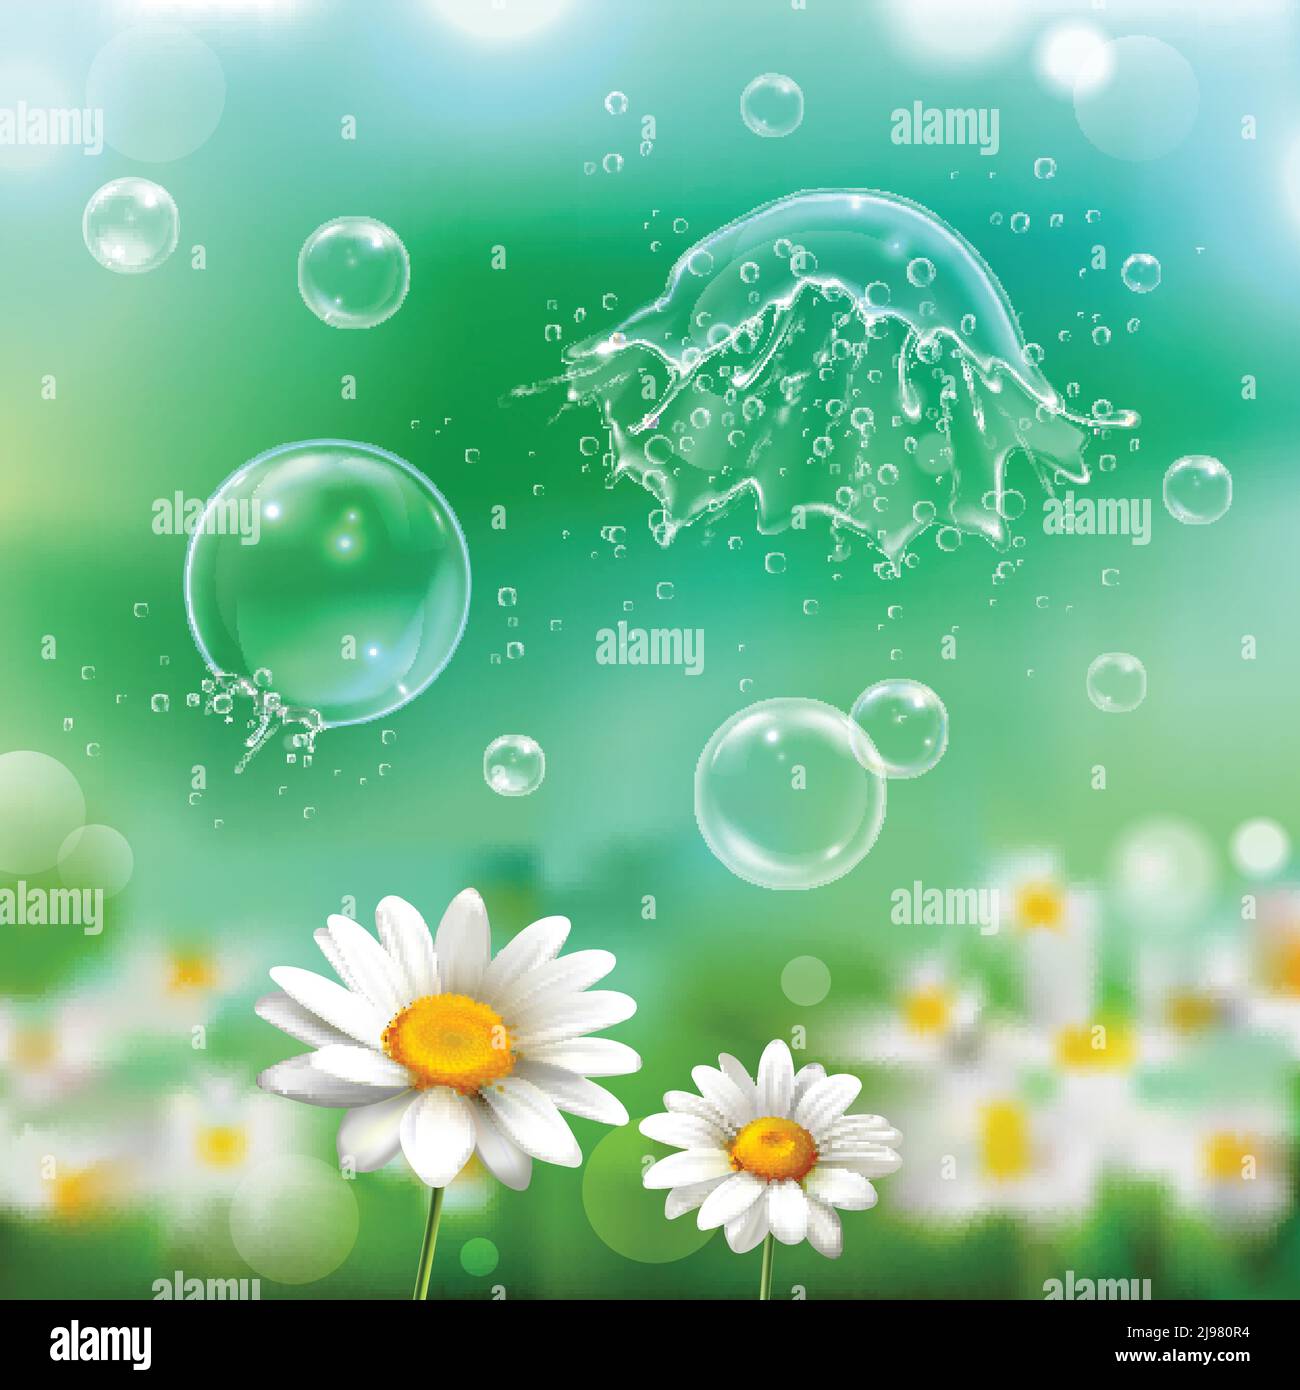 Soap bubbles floating bursting popping exploding above chamomile flowers realistic image with green blurry background vector illustration Stock Vector